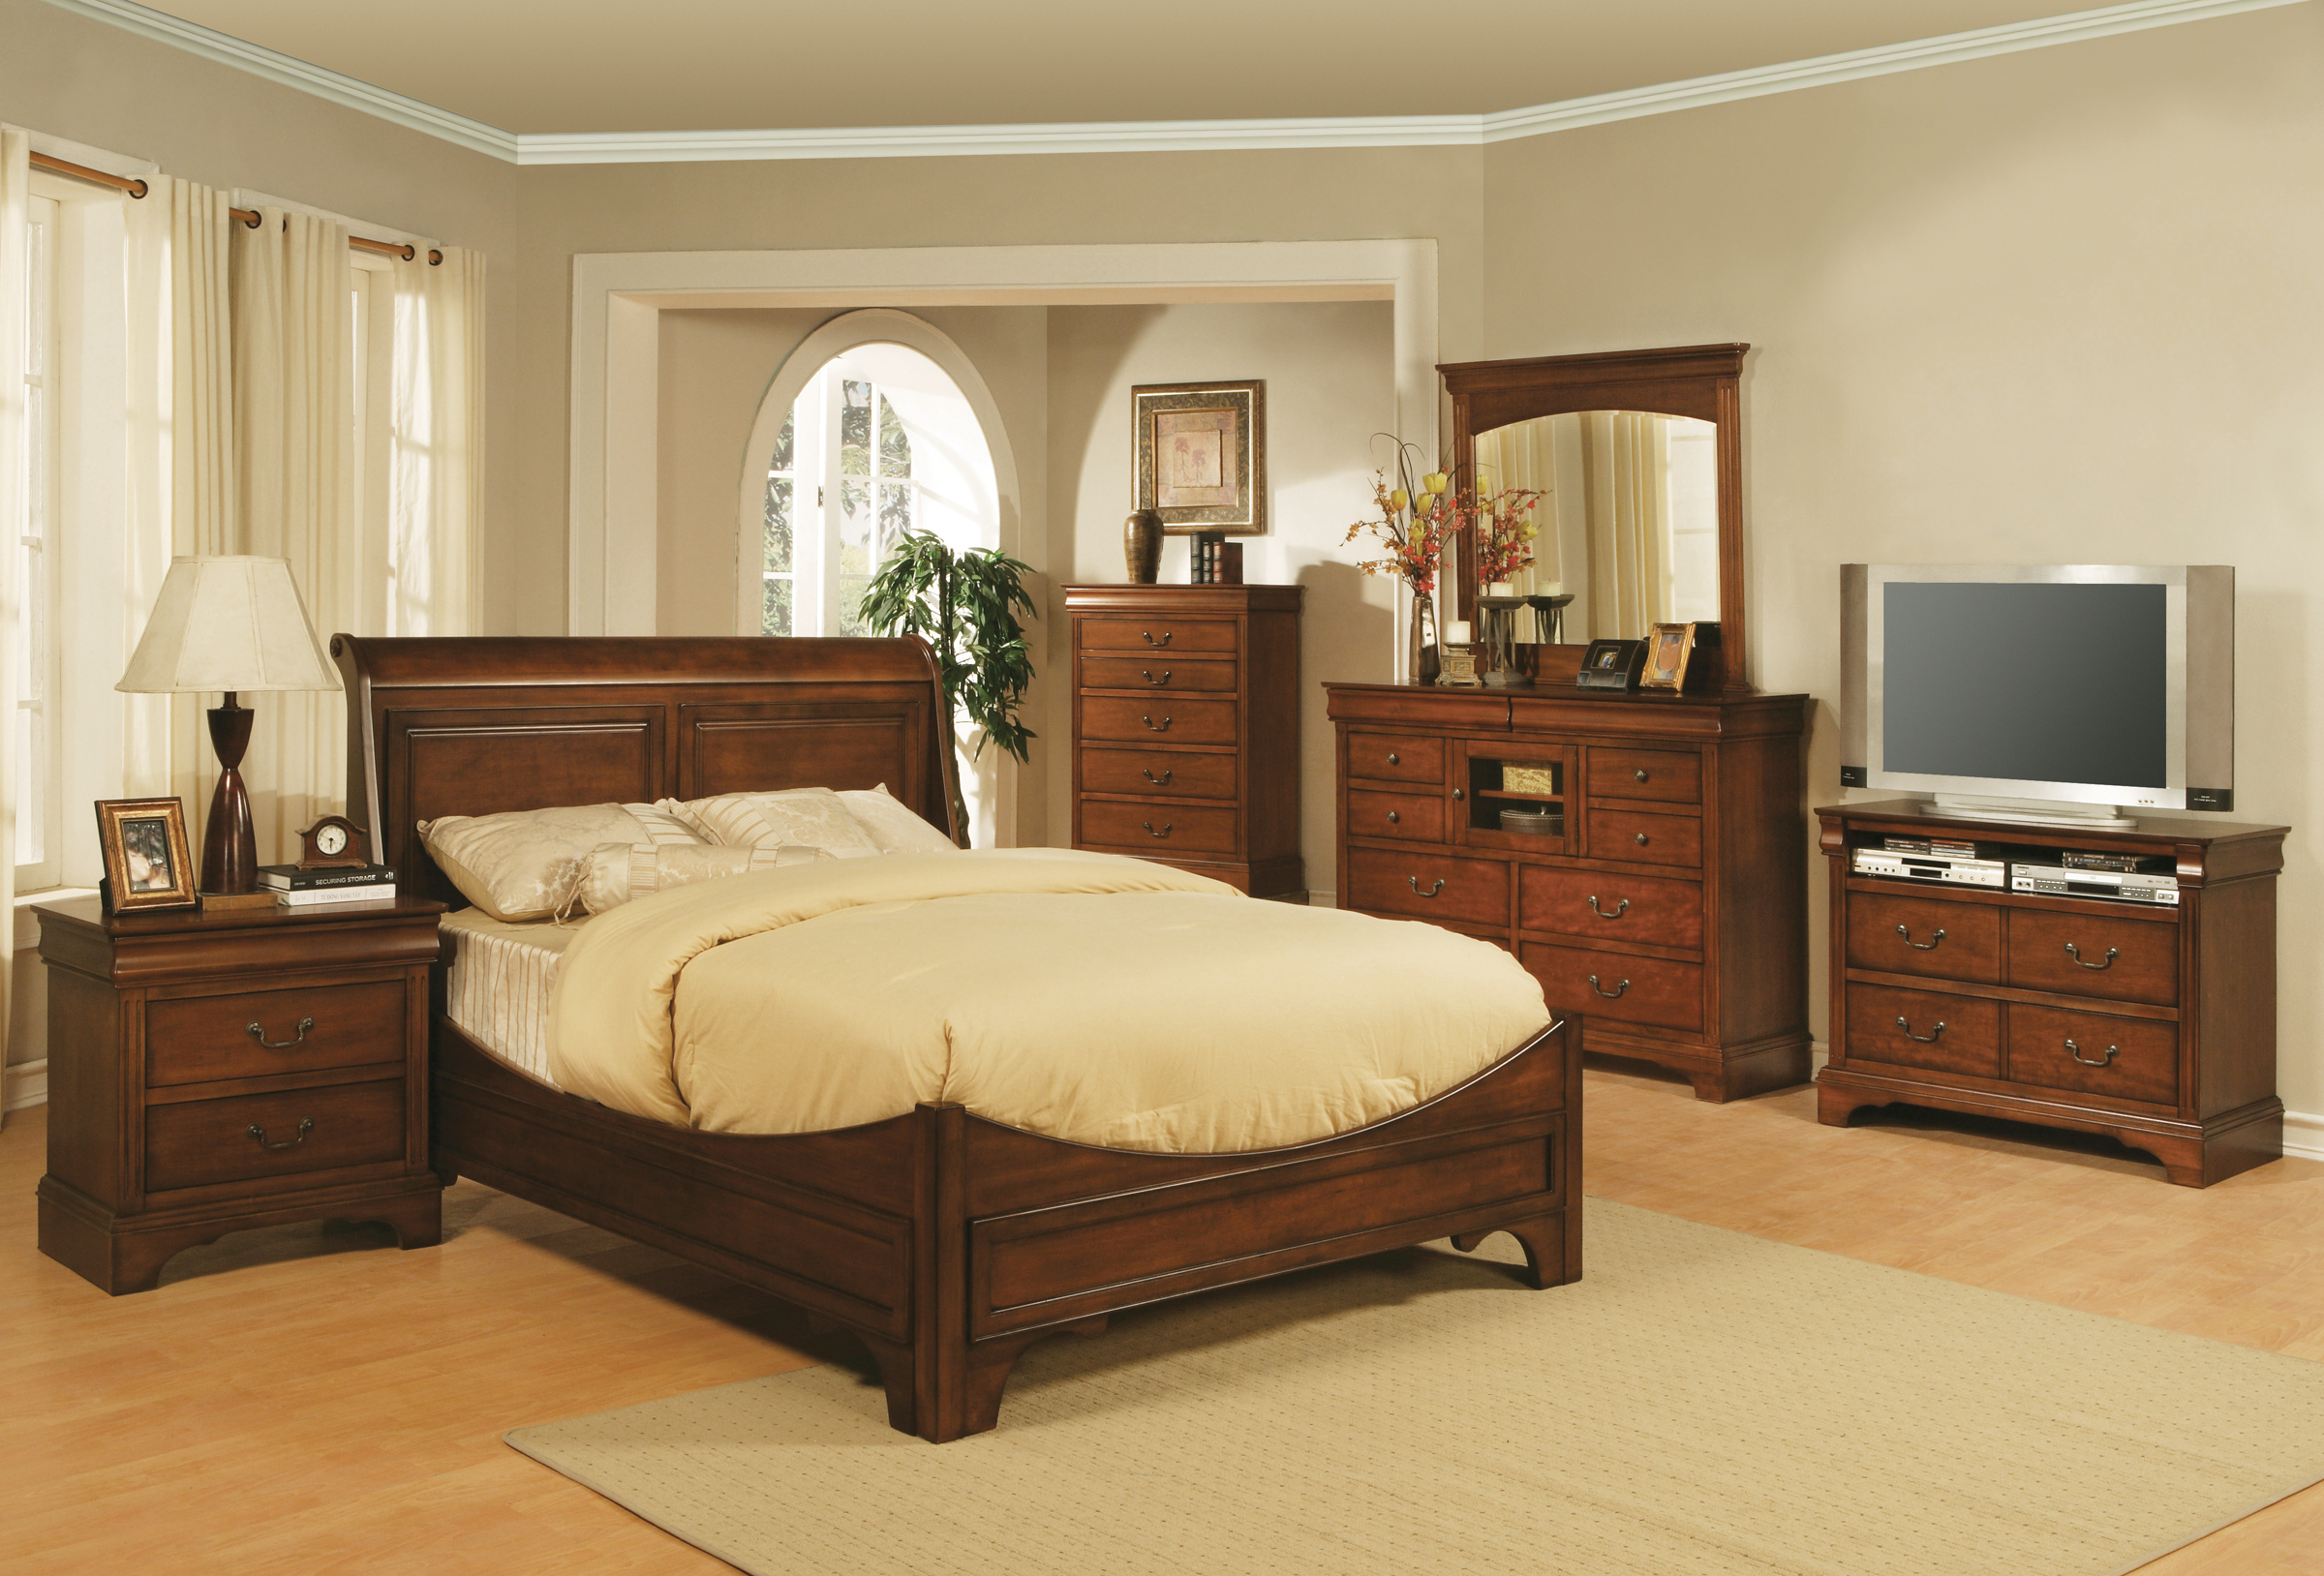 Bedroom Furniture Stores Near Me - Bedroom Furniture Queens Ny And